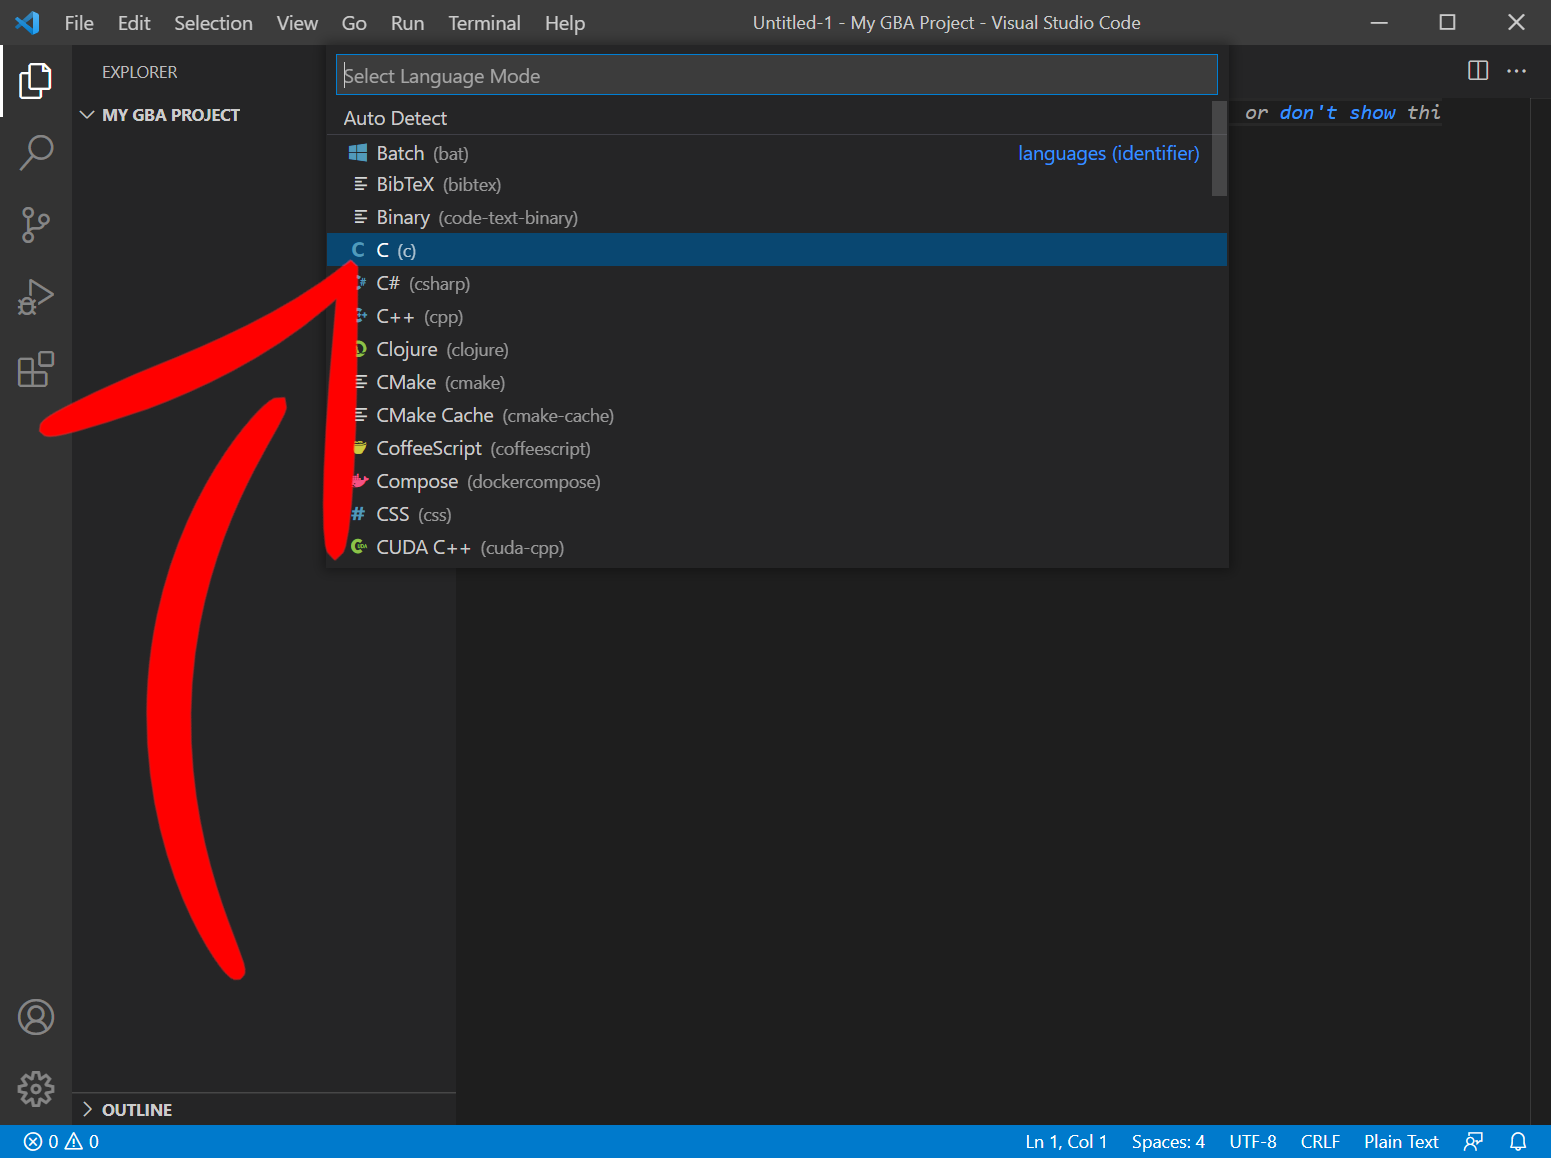 VSCode with the language selection open and a red arrow pointing at C